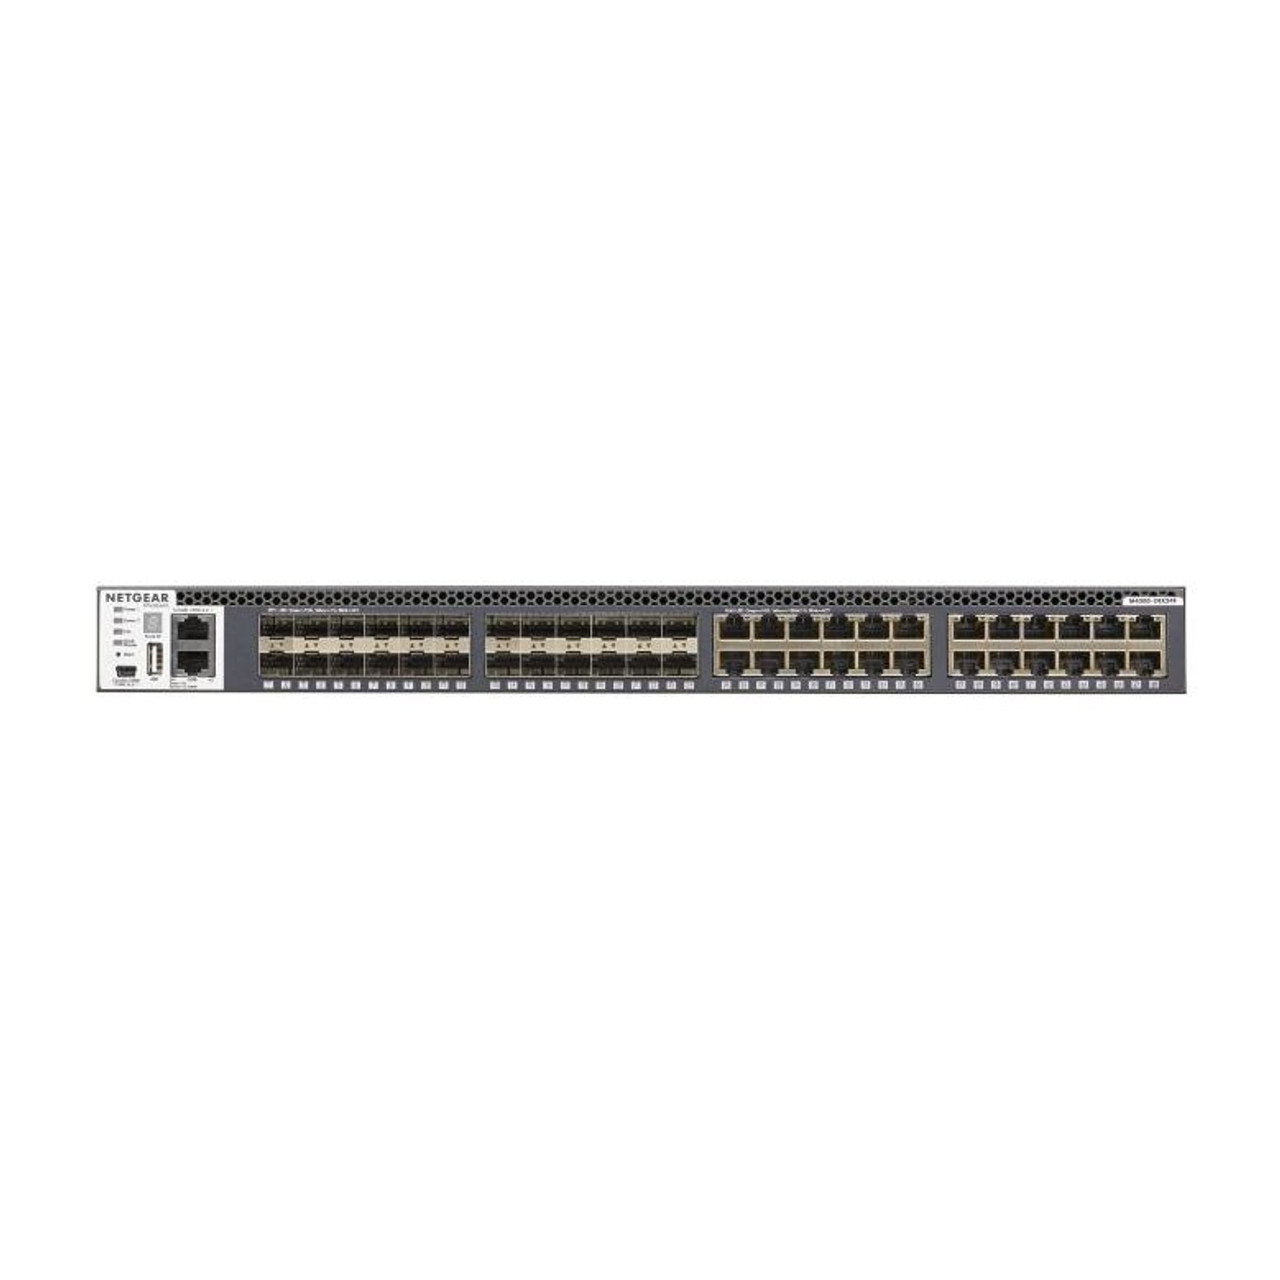 Netgear M4300-24X24F 24x10G Layer 3 Stackable Managed Switch with 24x10G SFP